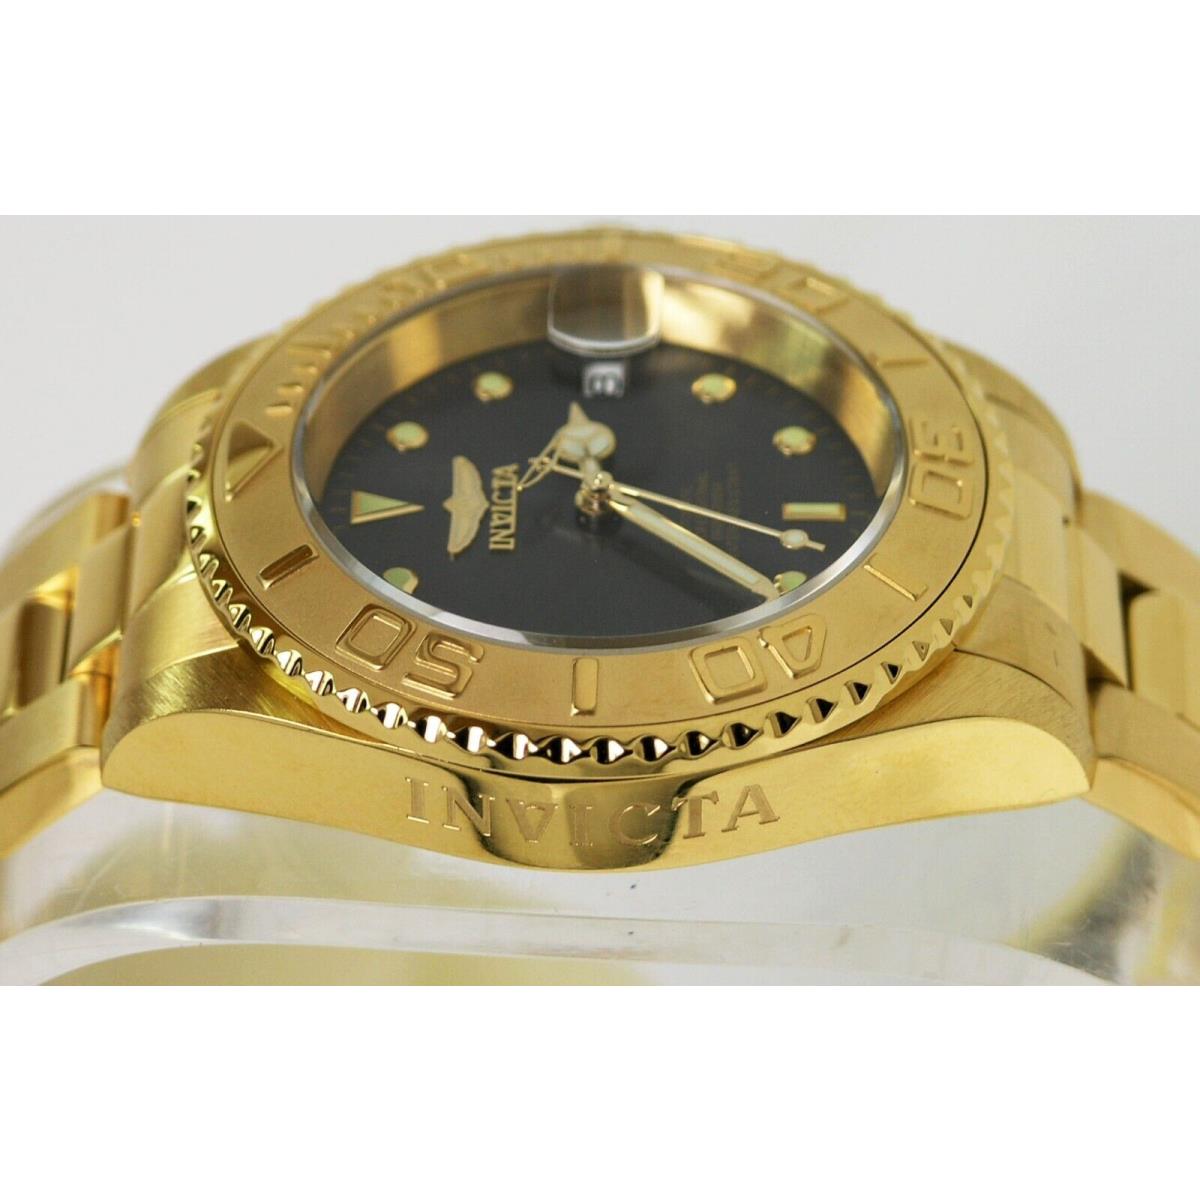 Invicta watch Pro Diver - Gray Dial, Gold Band, Gold Bezel